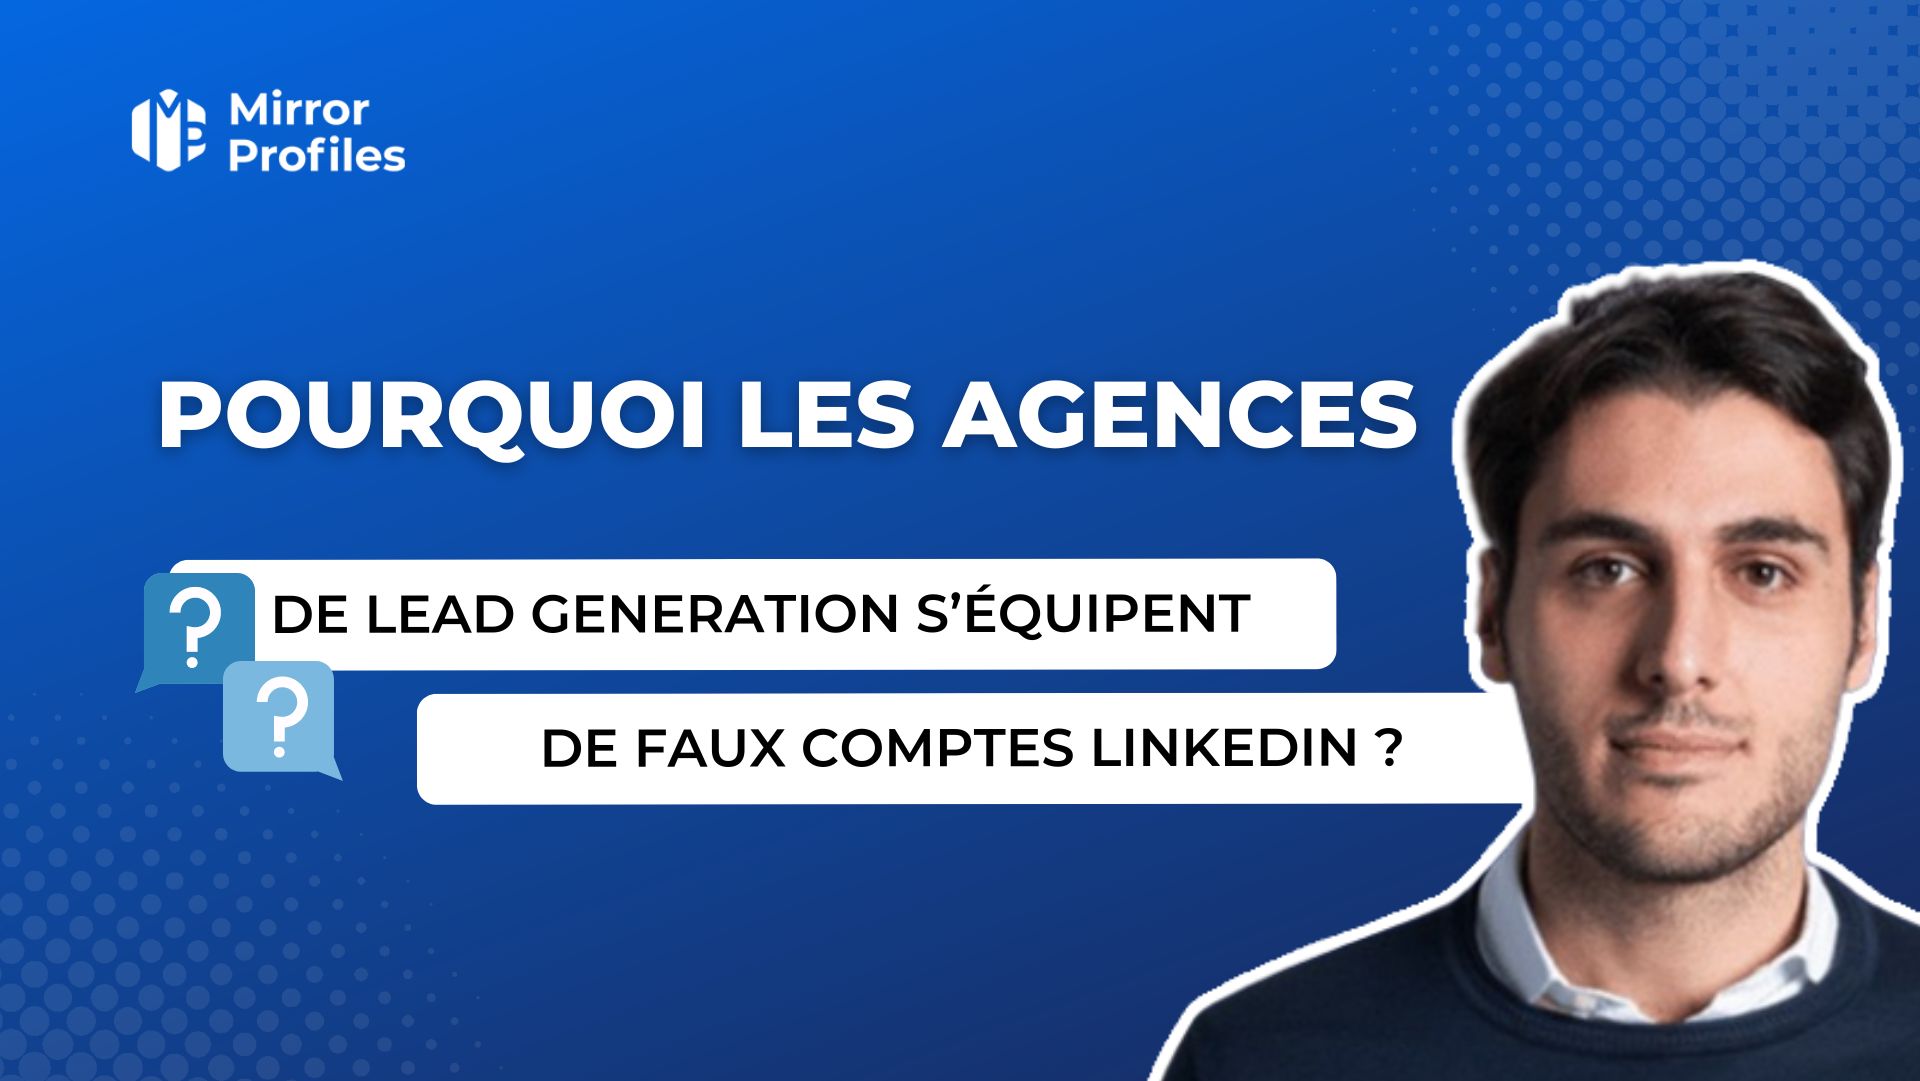 A headshot of a man with a question highlighted: "Why lead generation agencies buy fake Linkedin accounts?" The Mirror Profiles logo appears in the top left corner against a blue background.